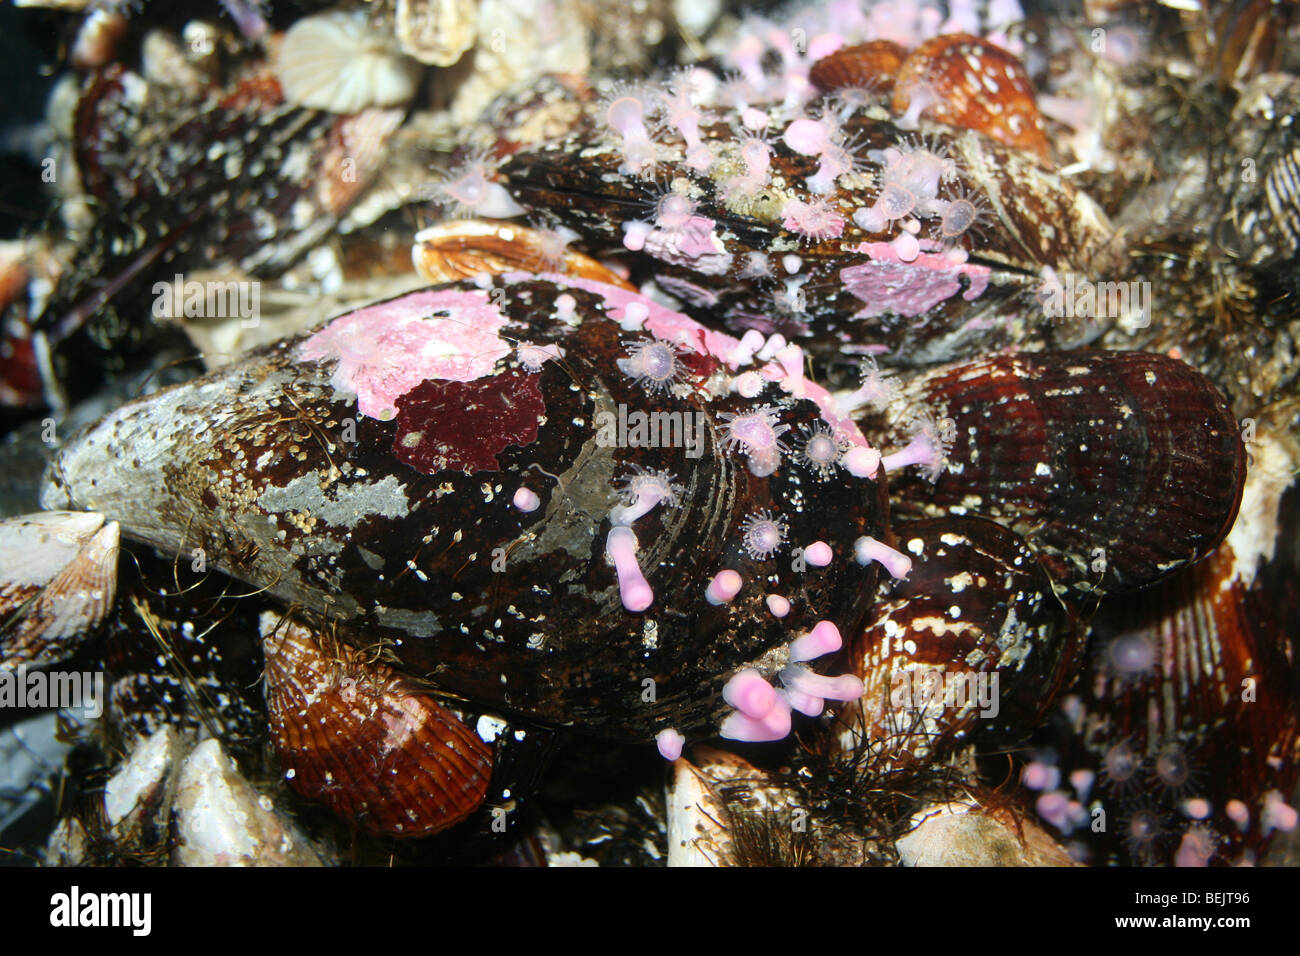 Strawberry Anemone Corynactis annulata On Mussels Taken At Two Oceans Aquarium, Cape Town, South Africa Stock Photo